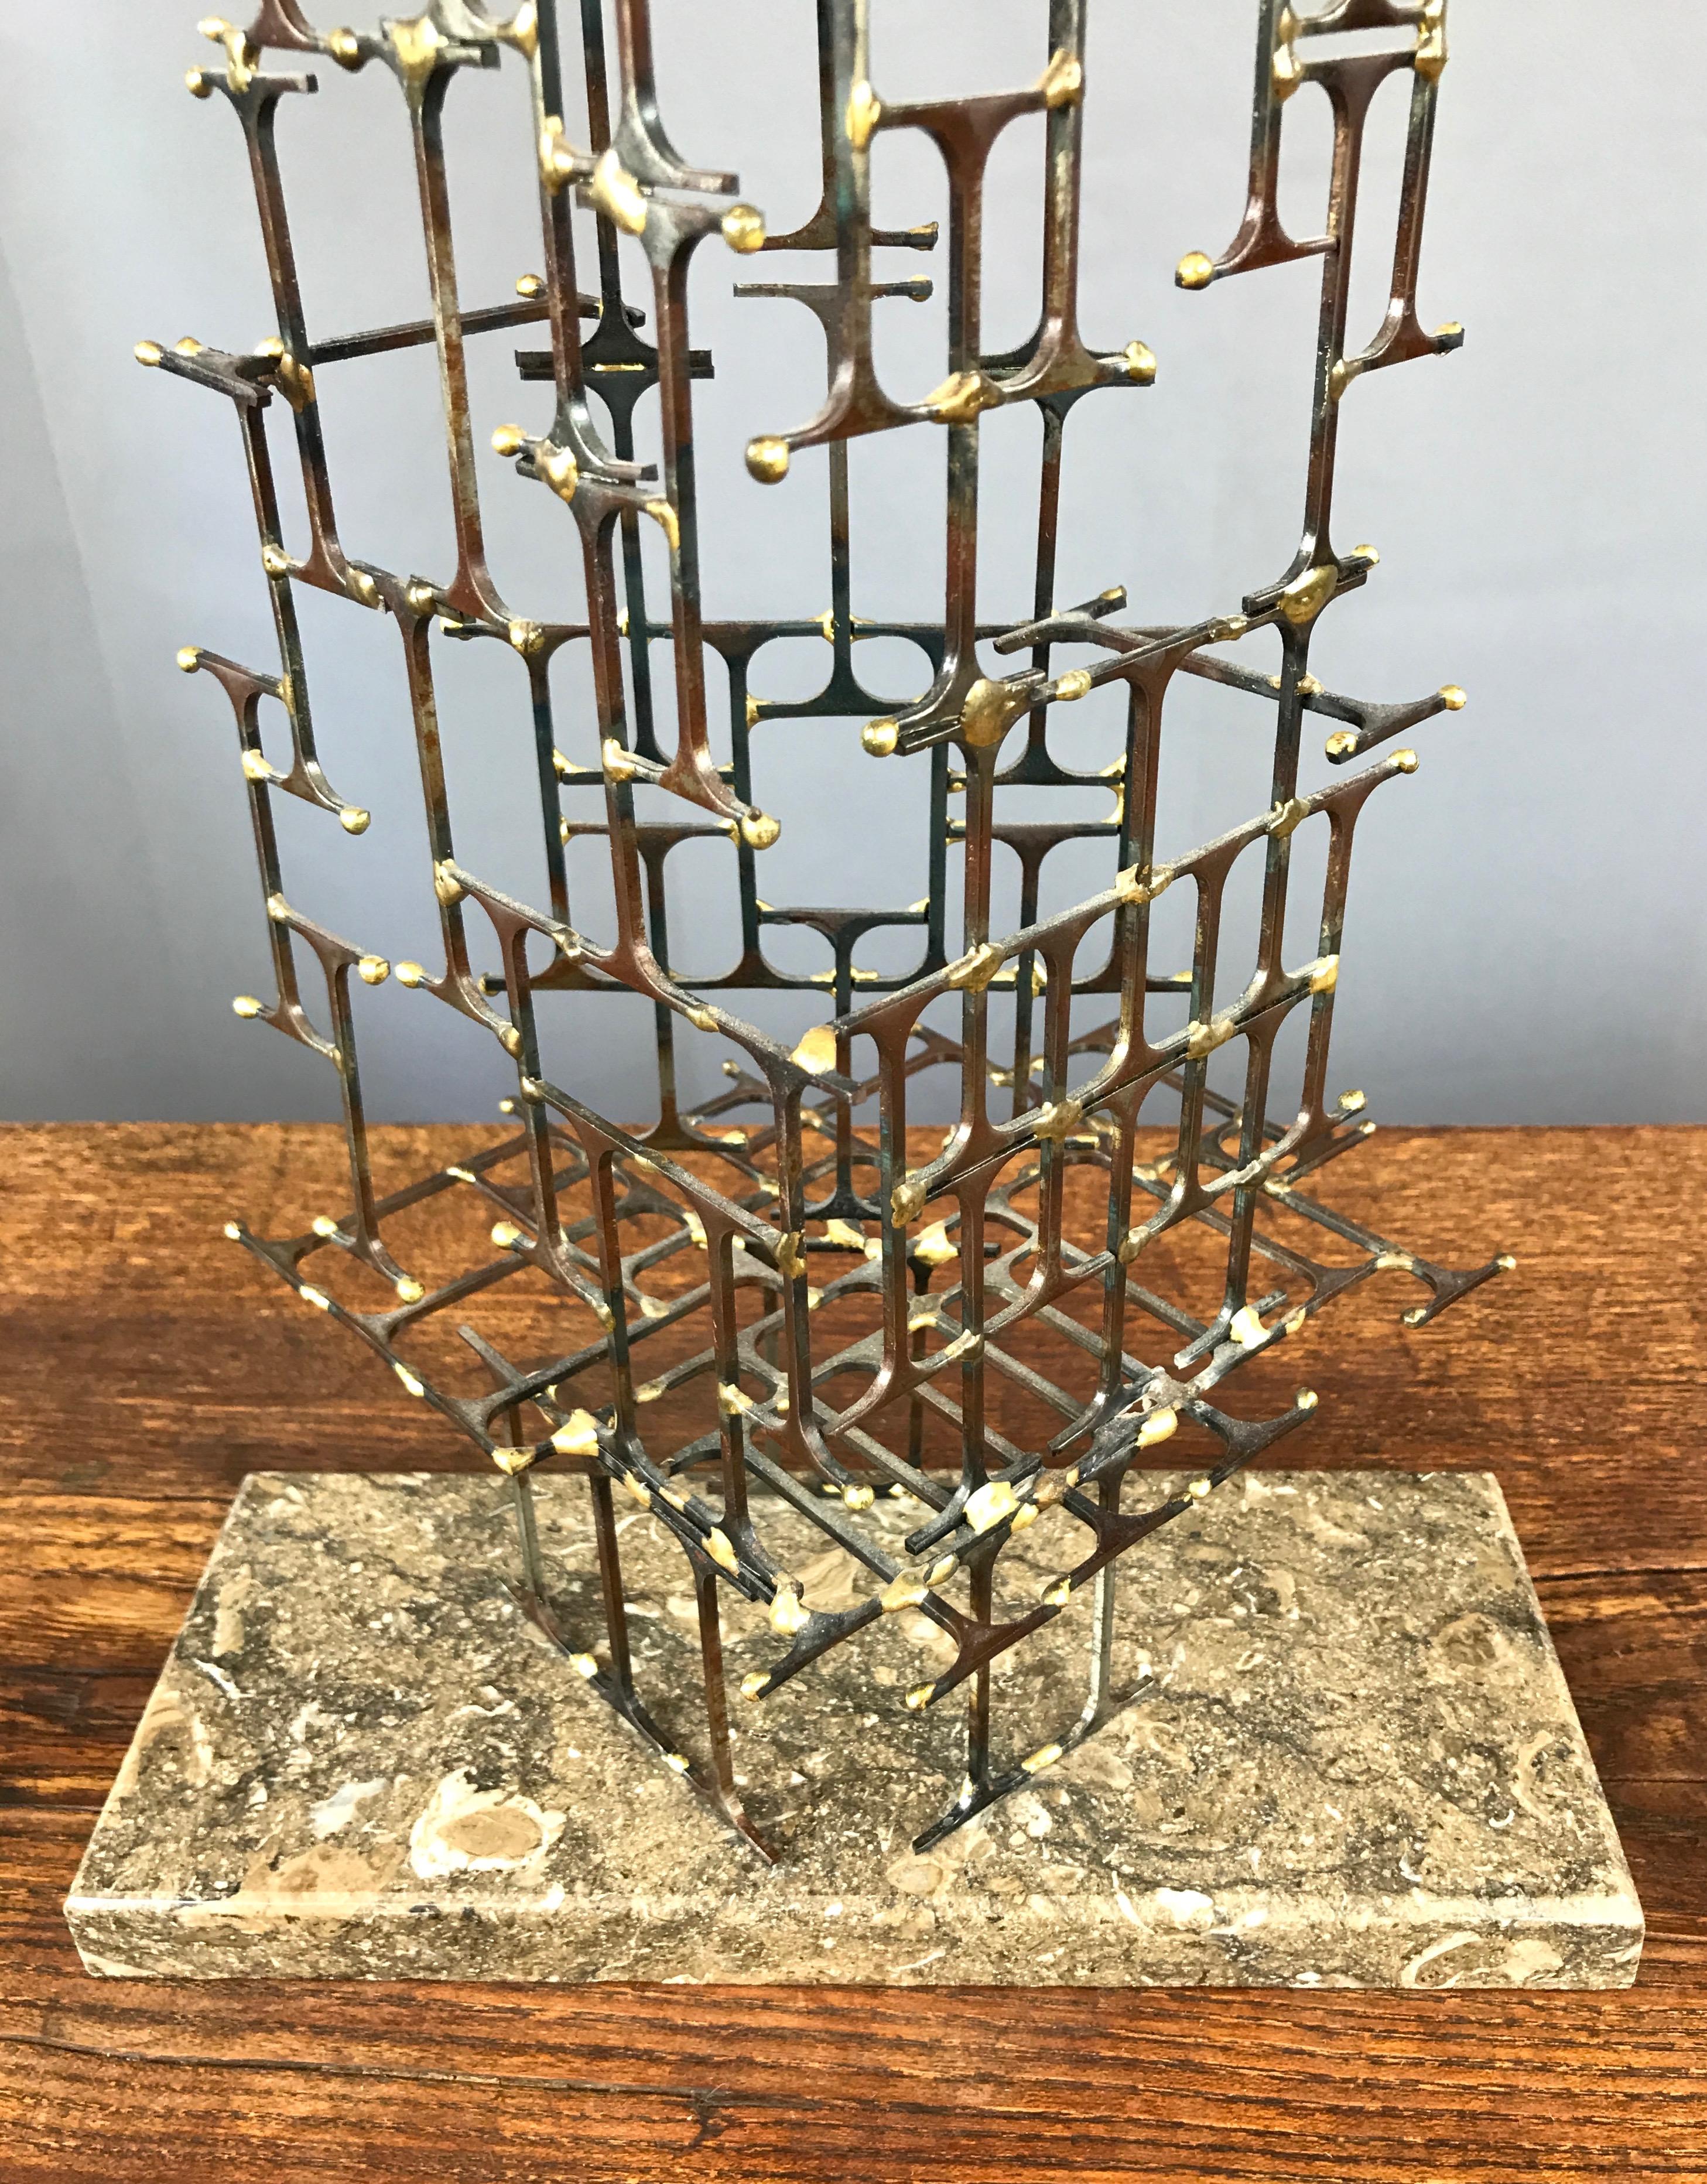 Late 20th Century Mario Jason Towering Brutalist Abstract Sculpture, Signed and Dated